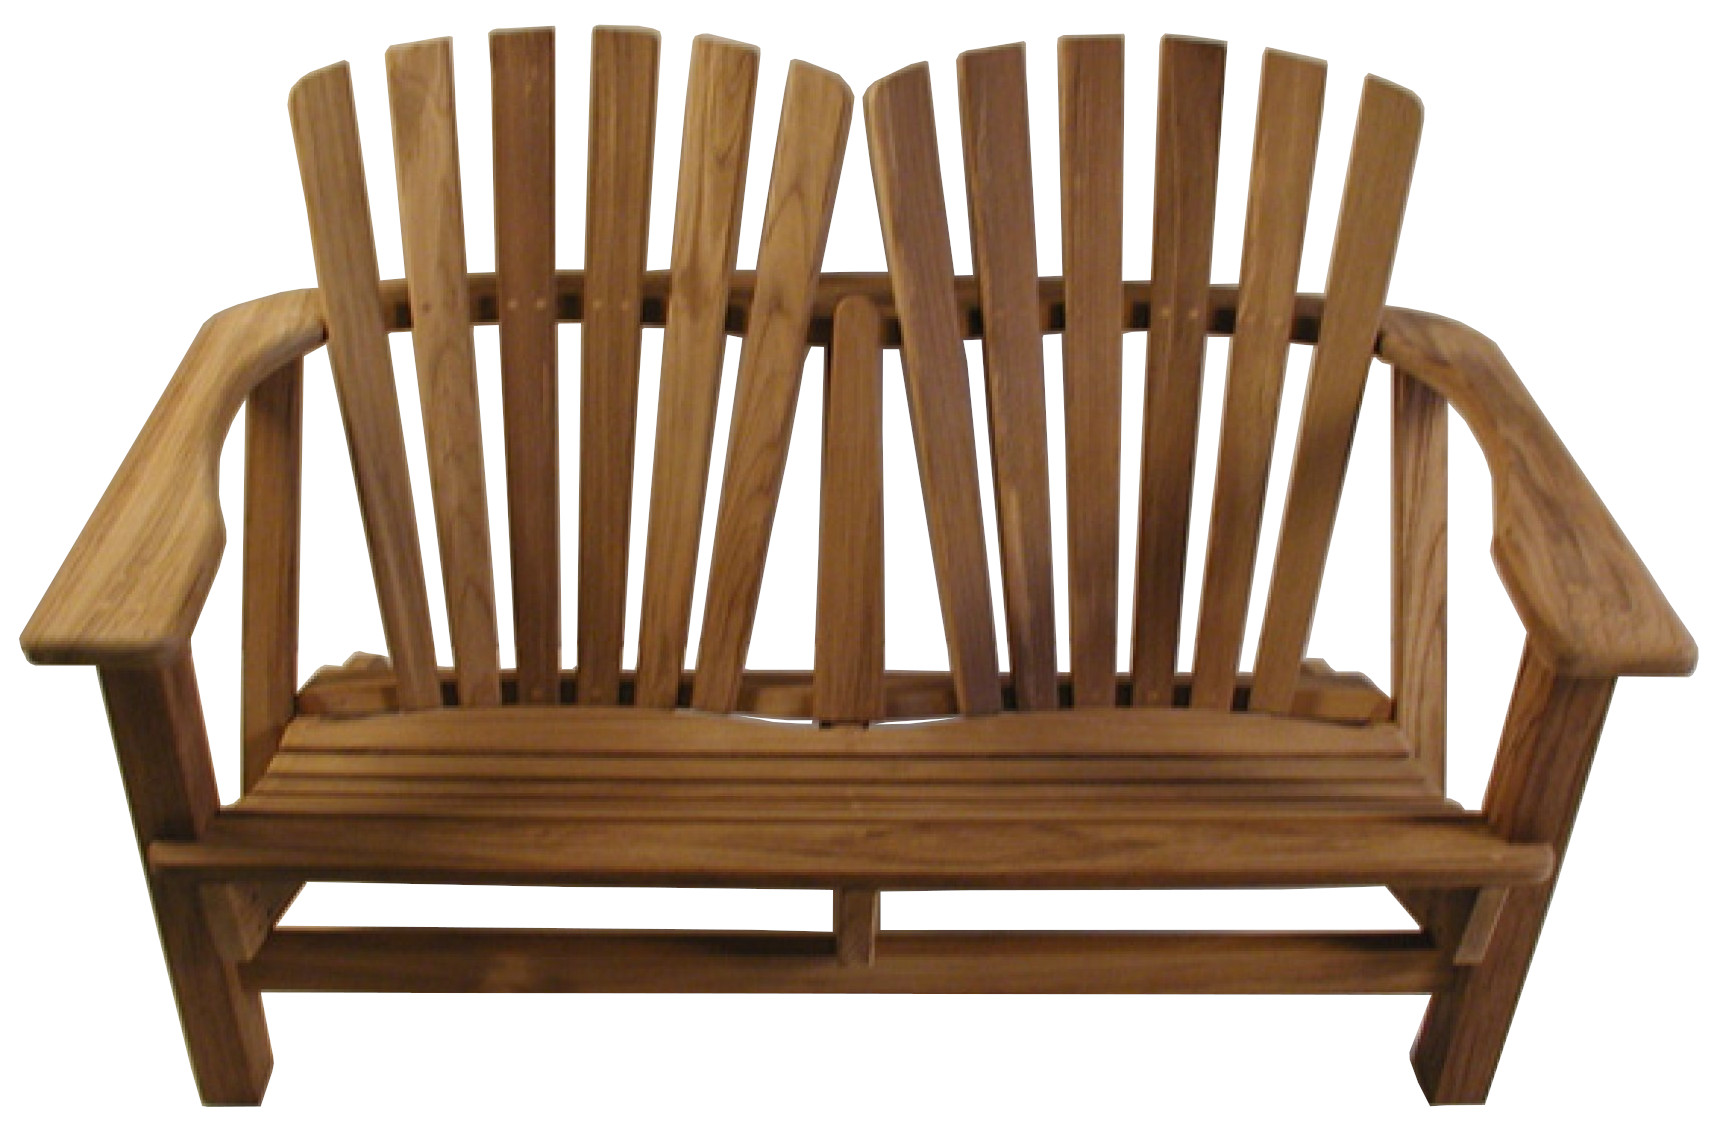 View adirondack chair as a double seater